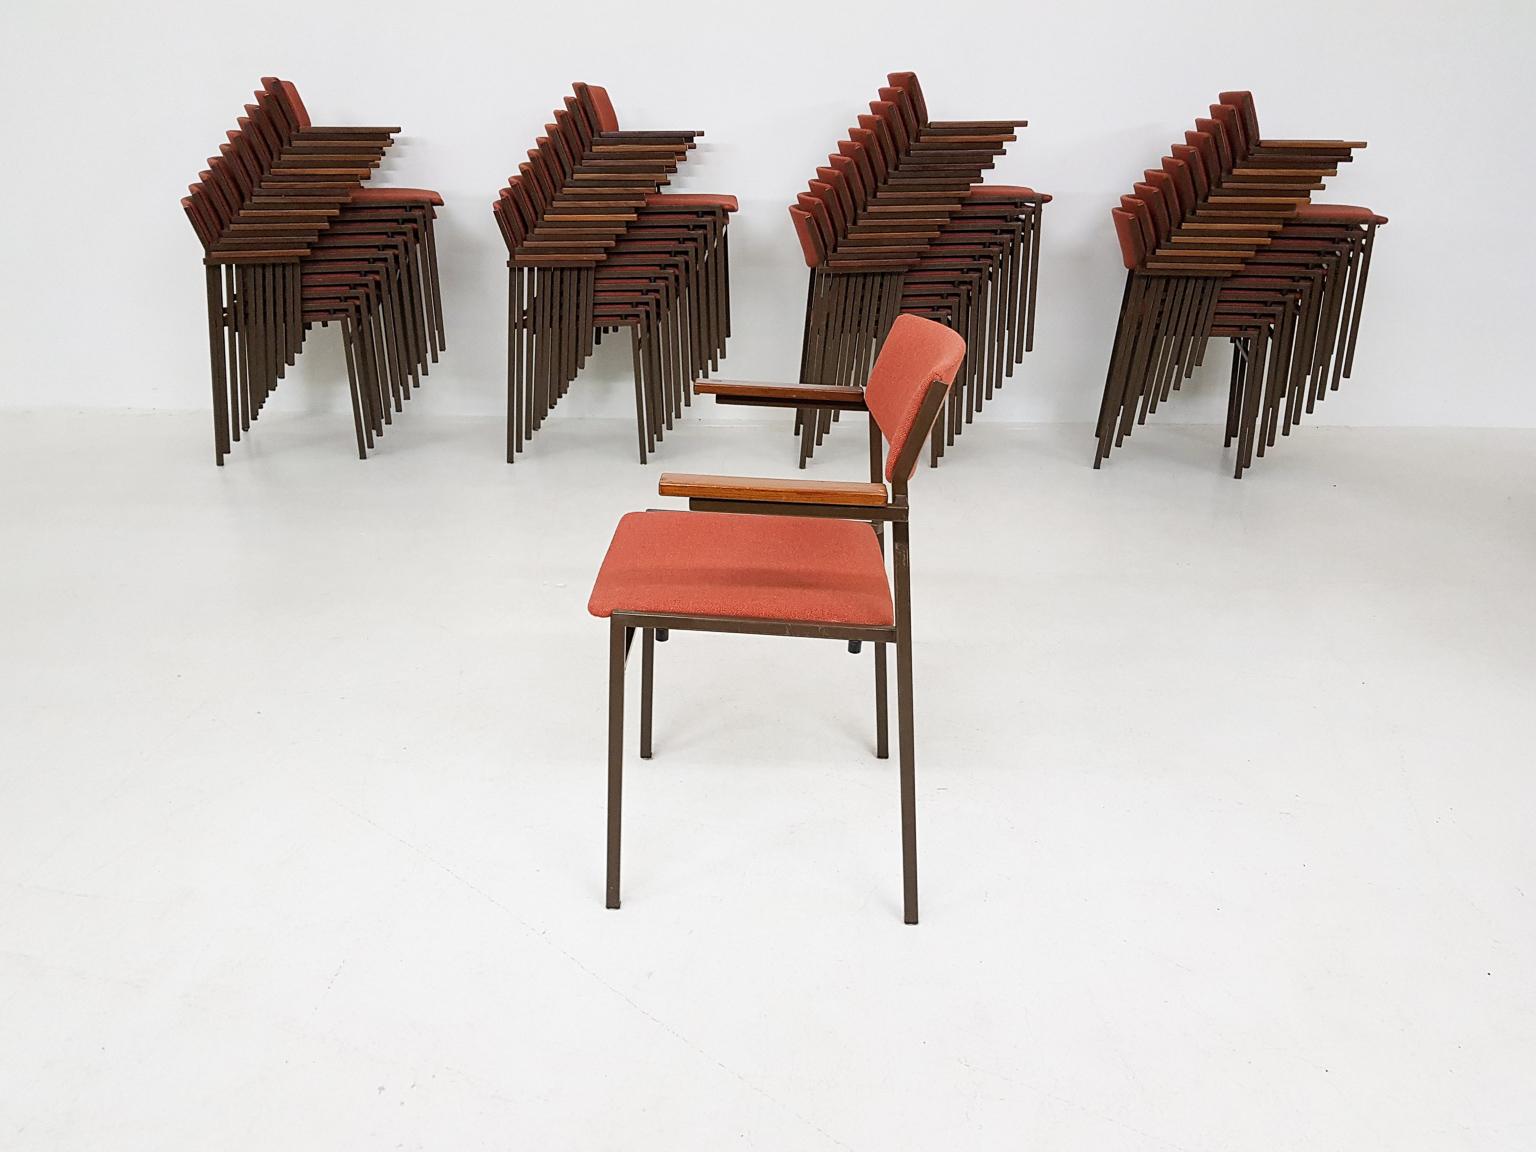 We have a large set of Dutch midcentury dining chairs available. The chairs are designed and manufactured by Gijs Van Der Sluis, the Netherlands 1960s.

This metal industrial dining chair is a nice example of midcentury Dutch modern. A sleek metal